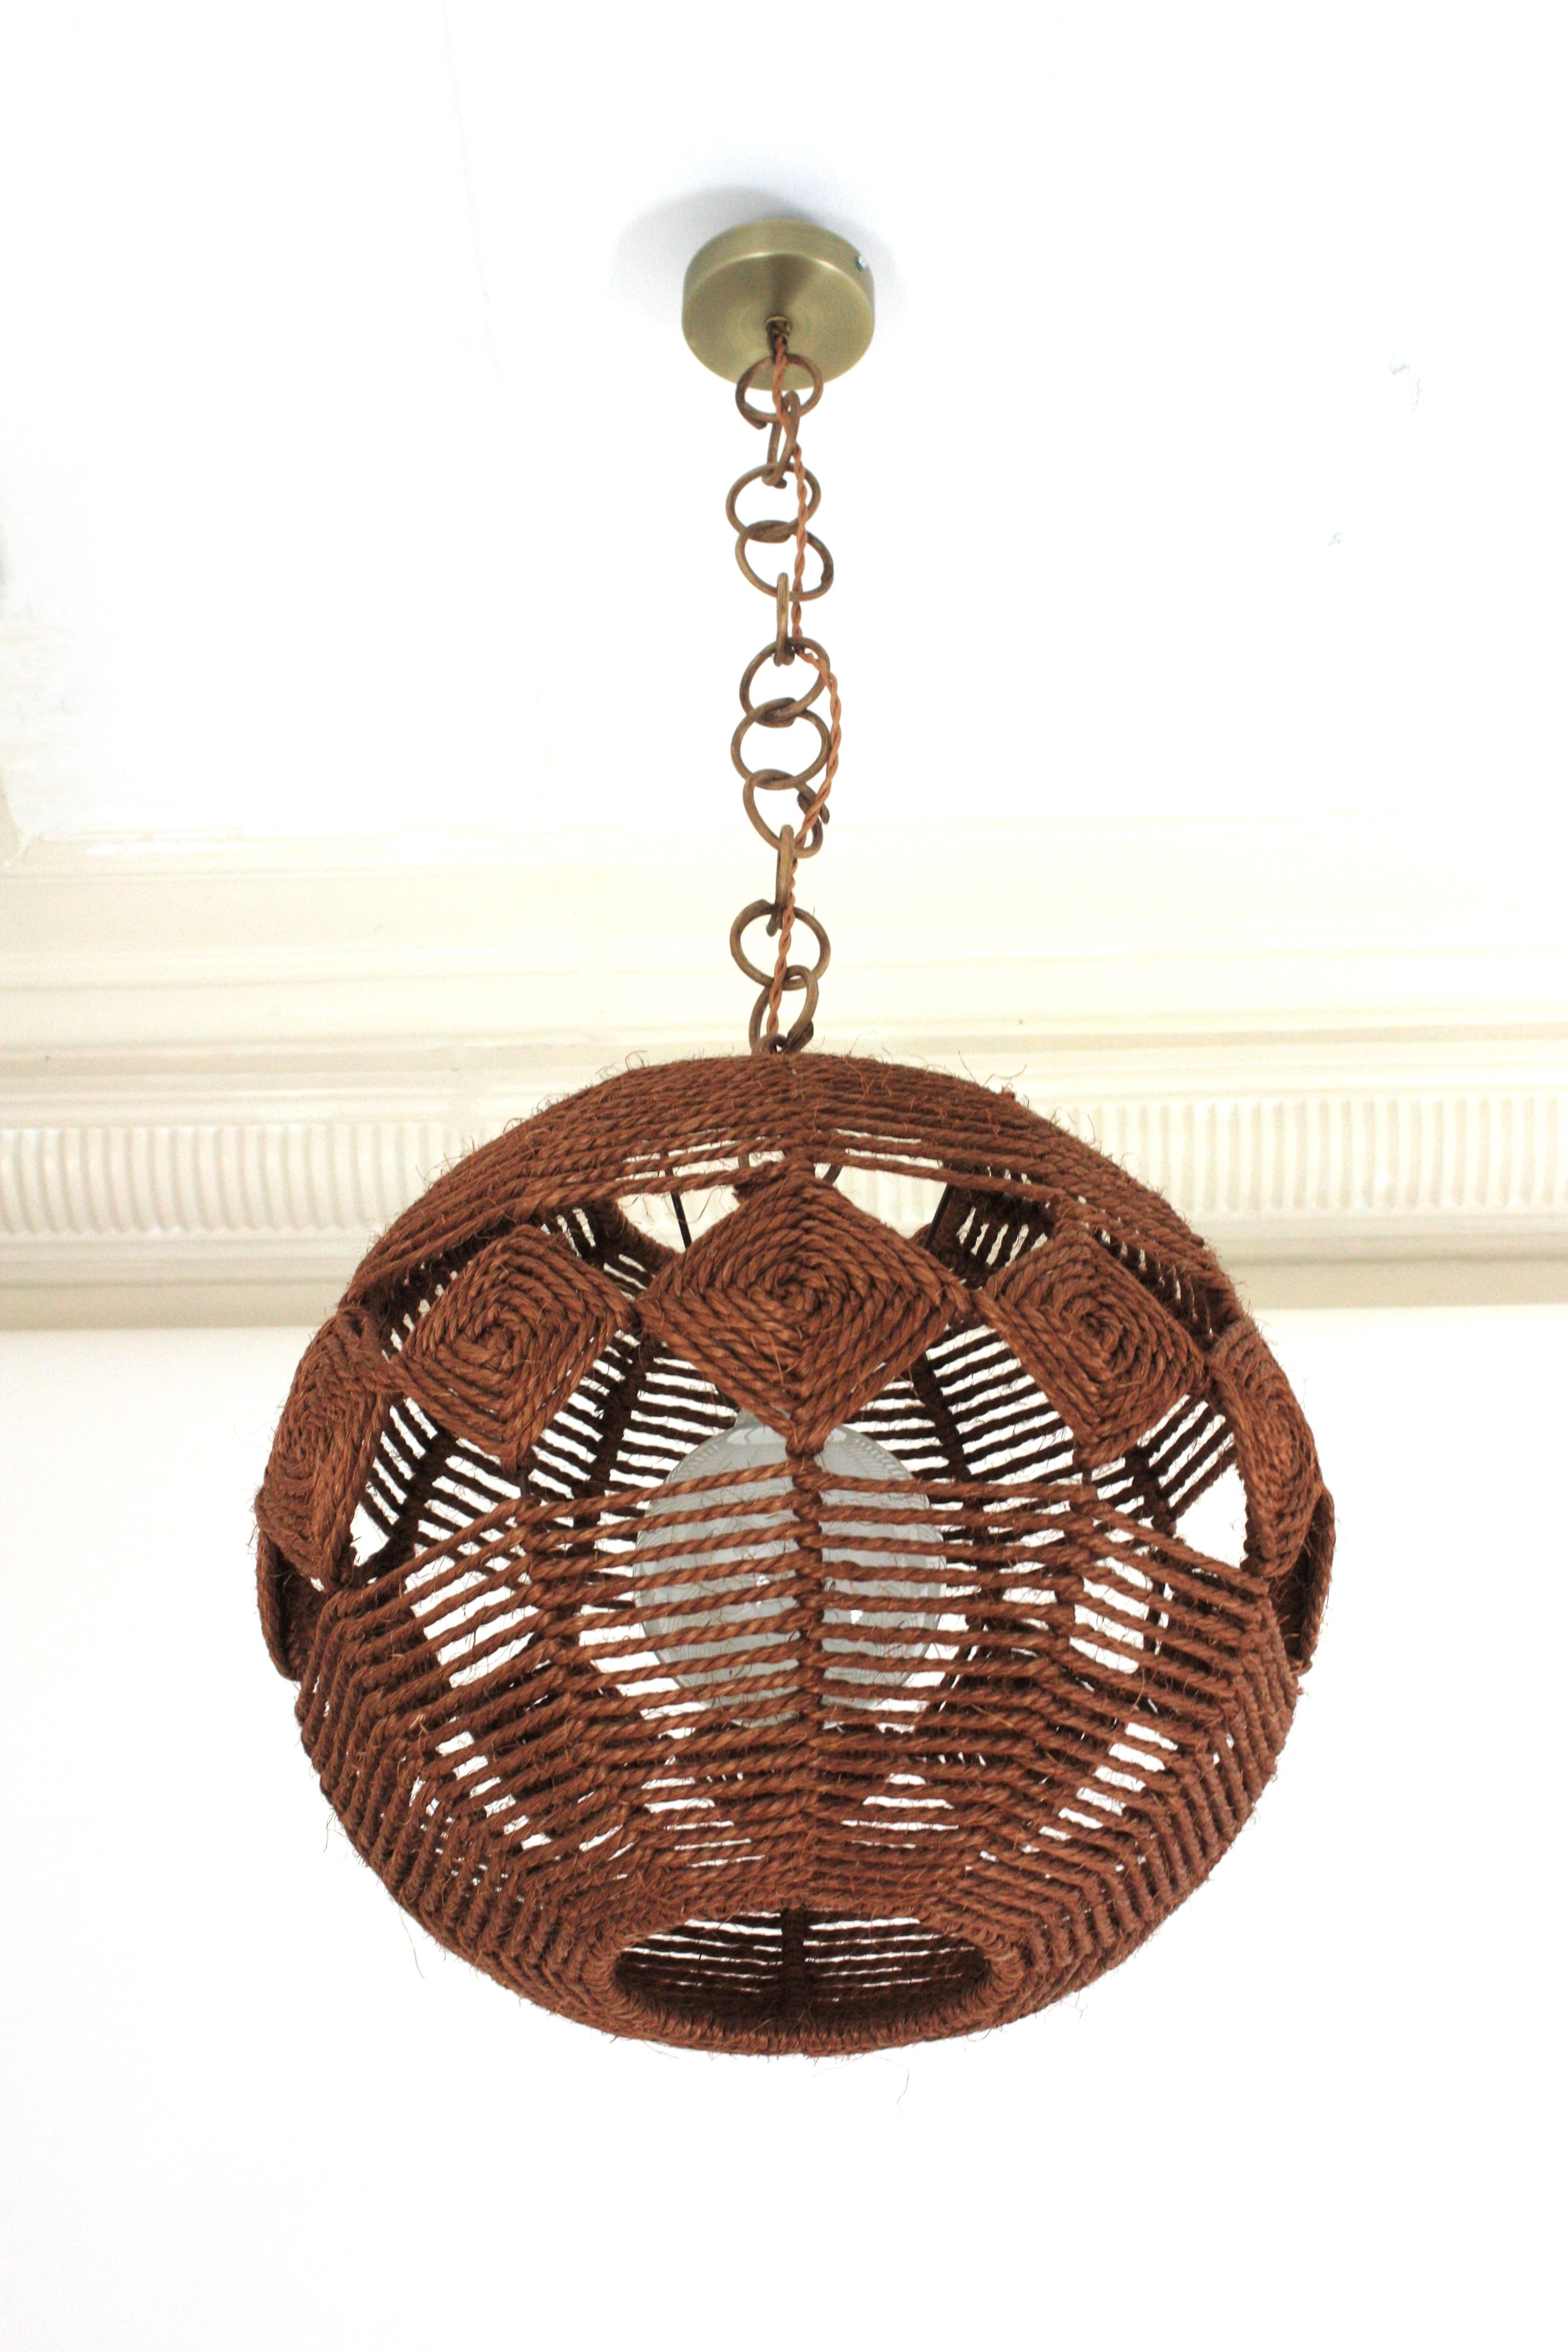 20th Century Spanish Large Rope Ball Pendant Light Ceiling Hanging Lamp, 1960s For Sale